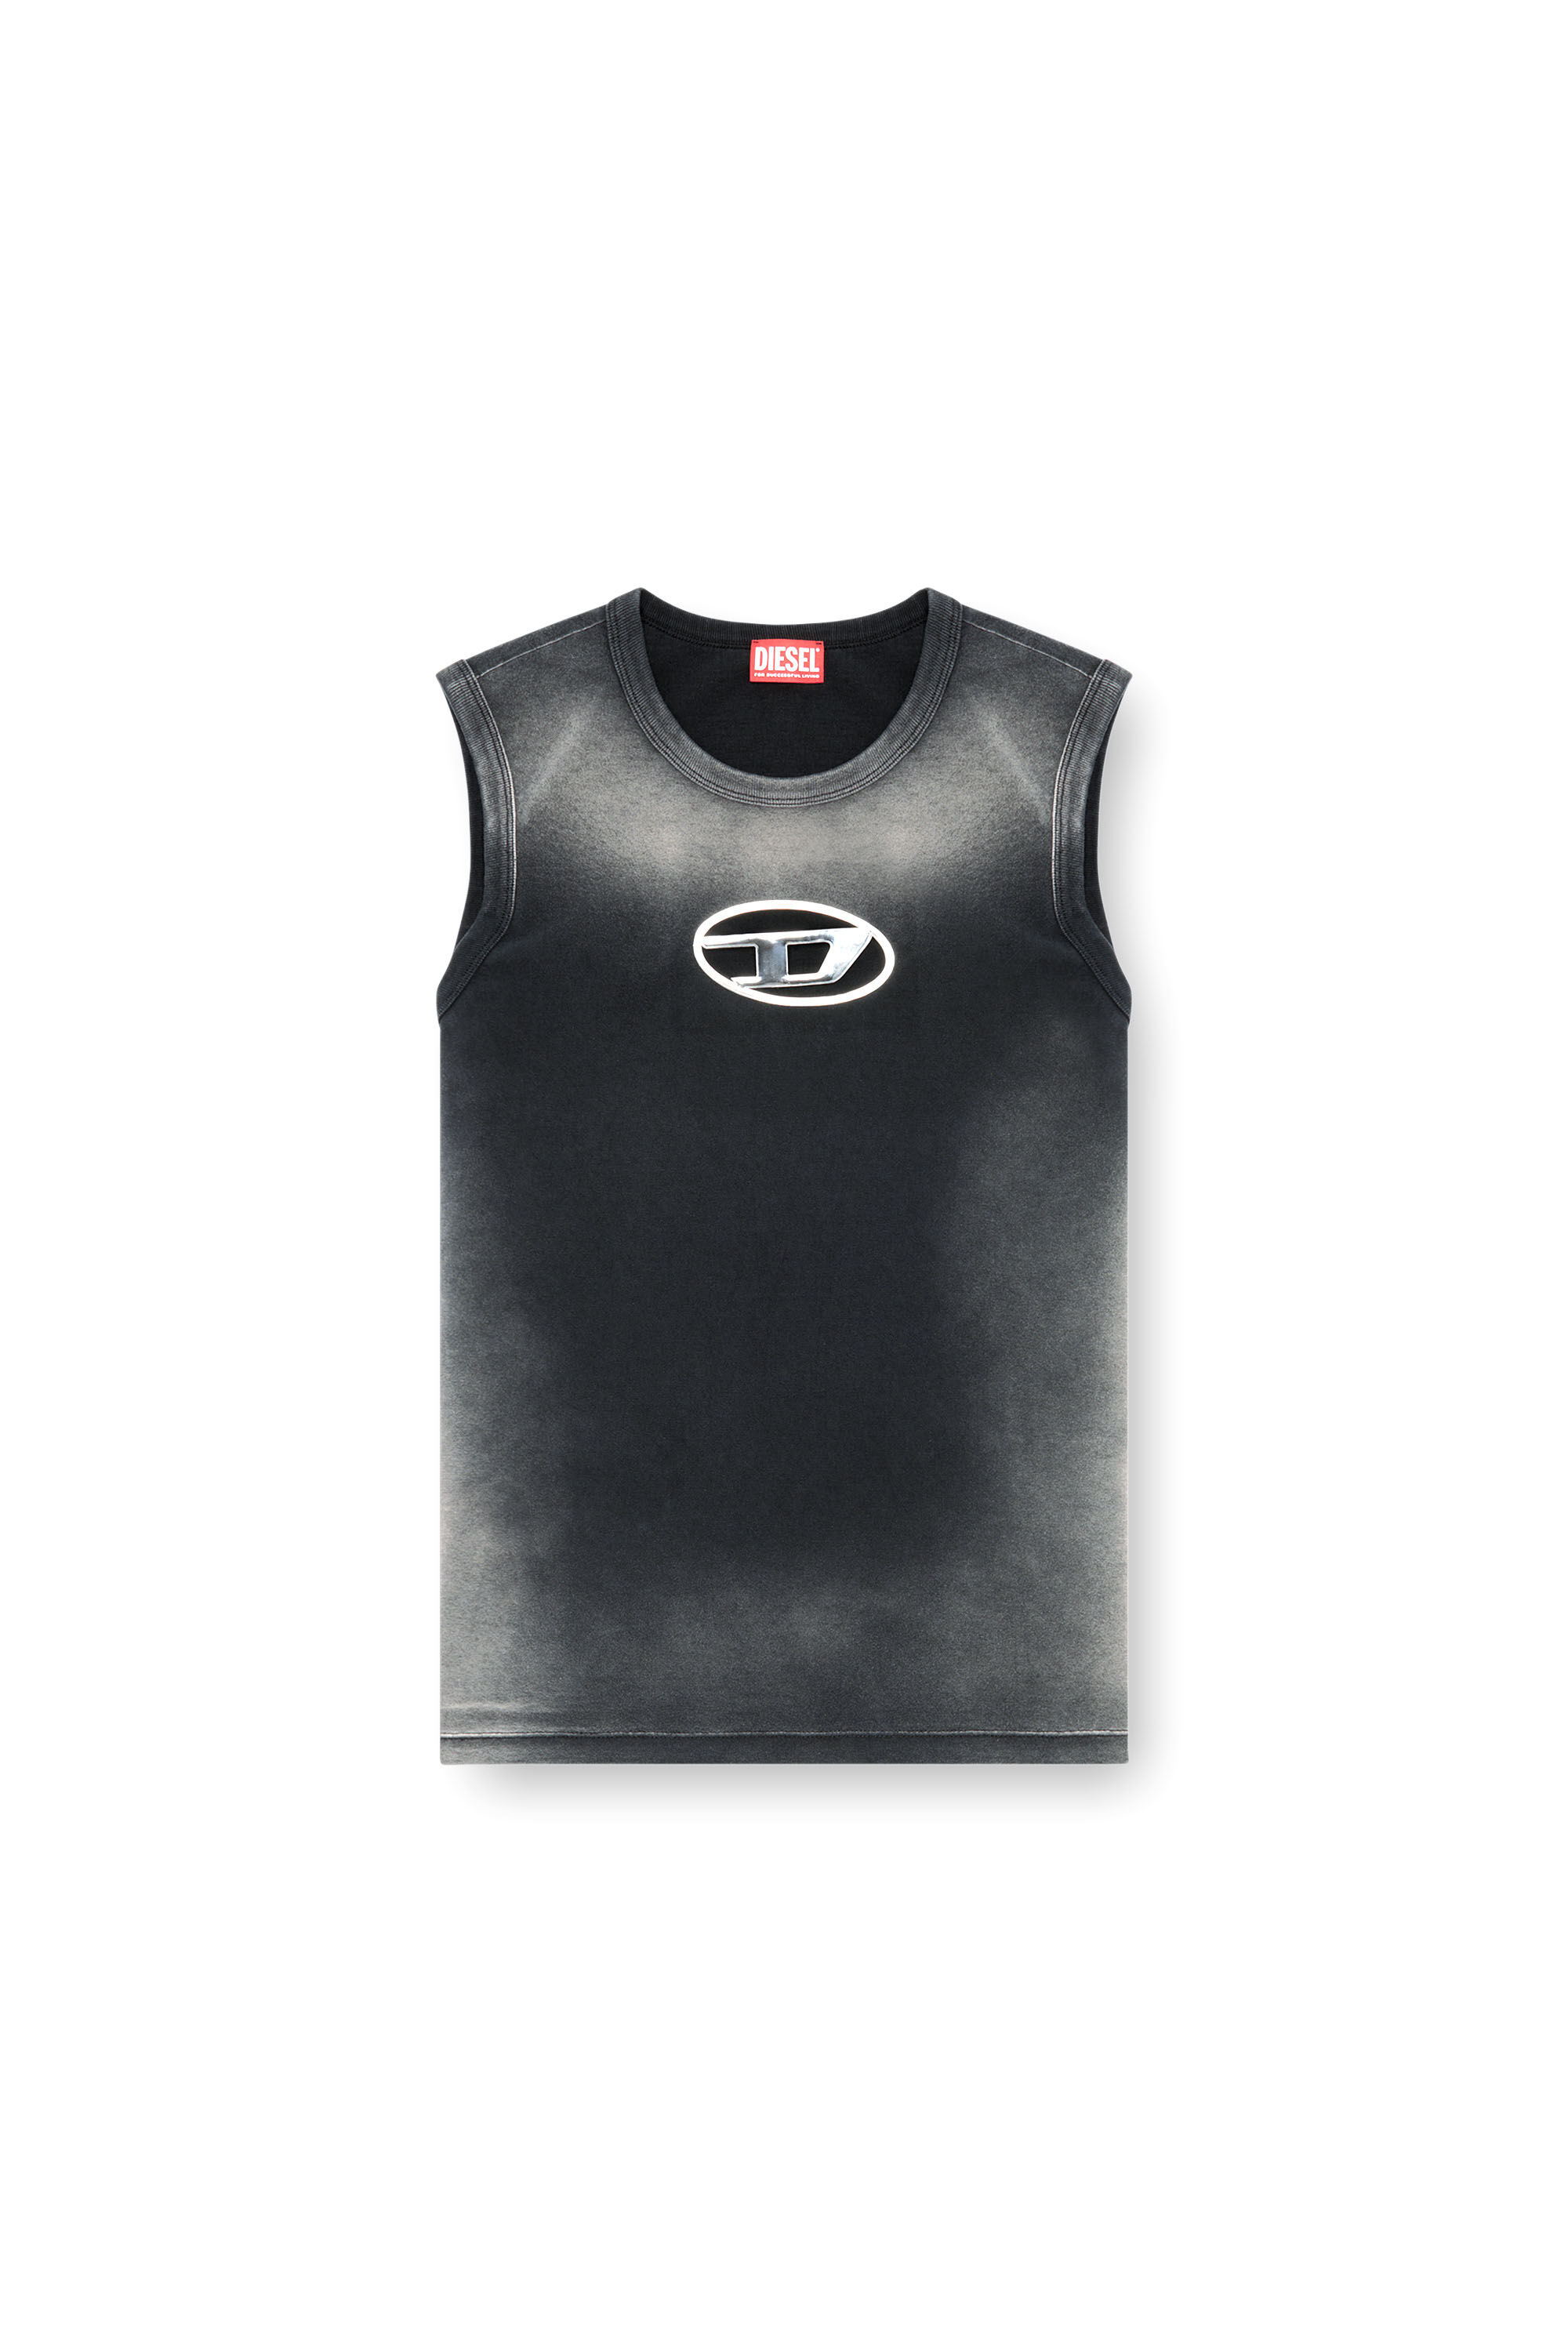 T-BRICO Faded tank top with puffy Oval D｜ブラック｜メンズ｜DIESEL